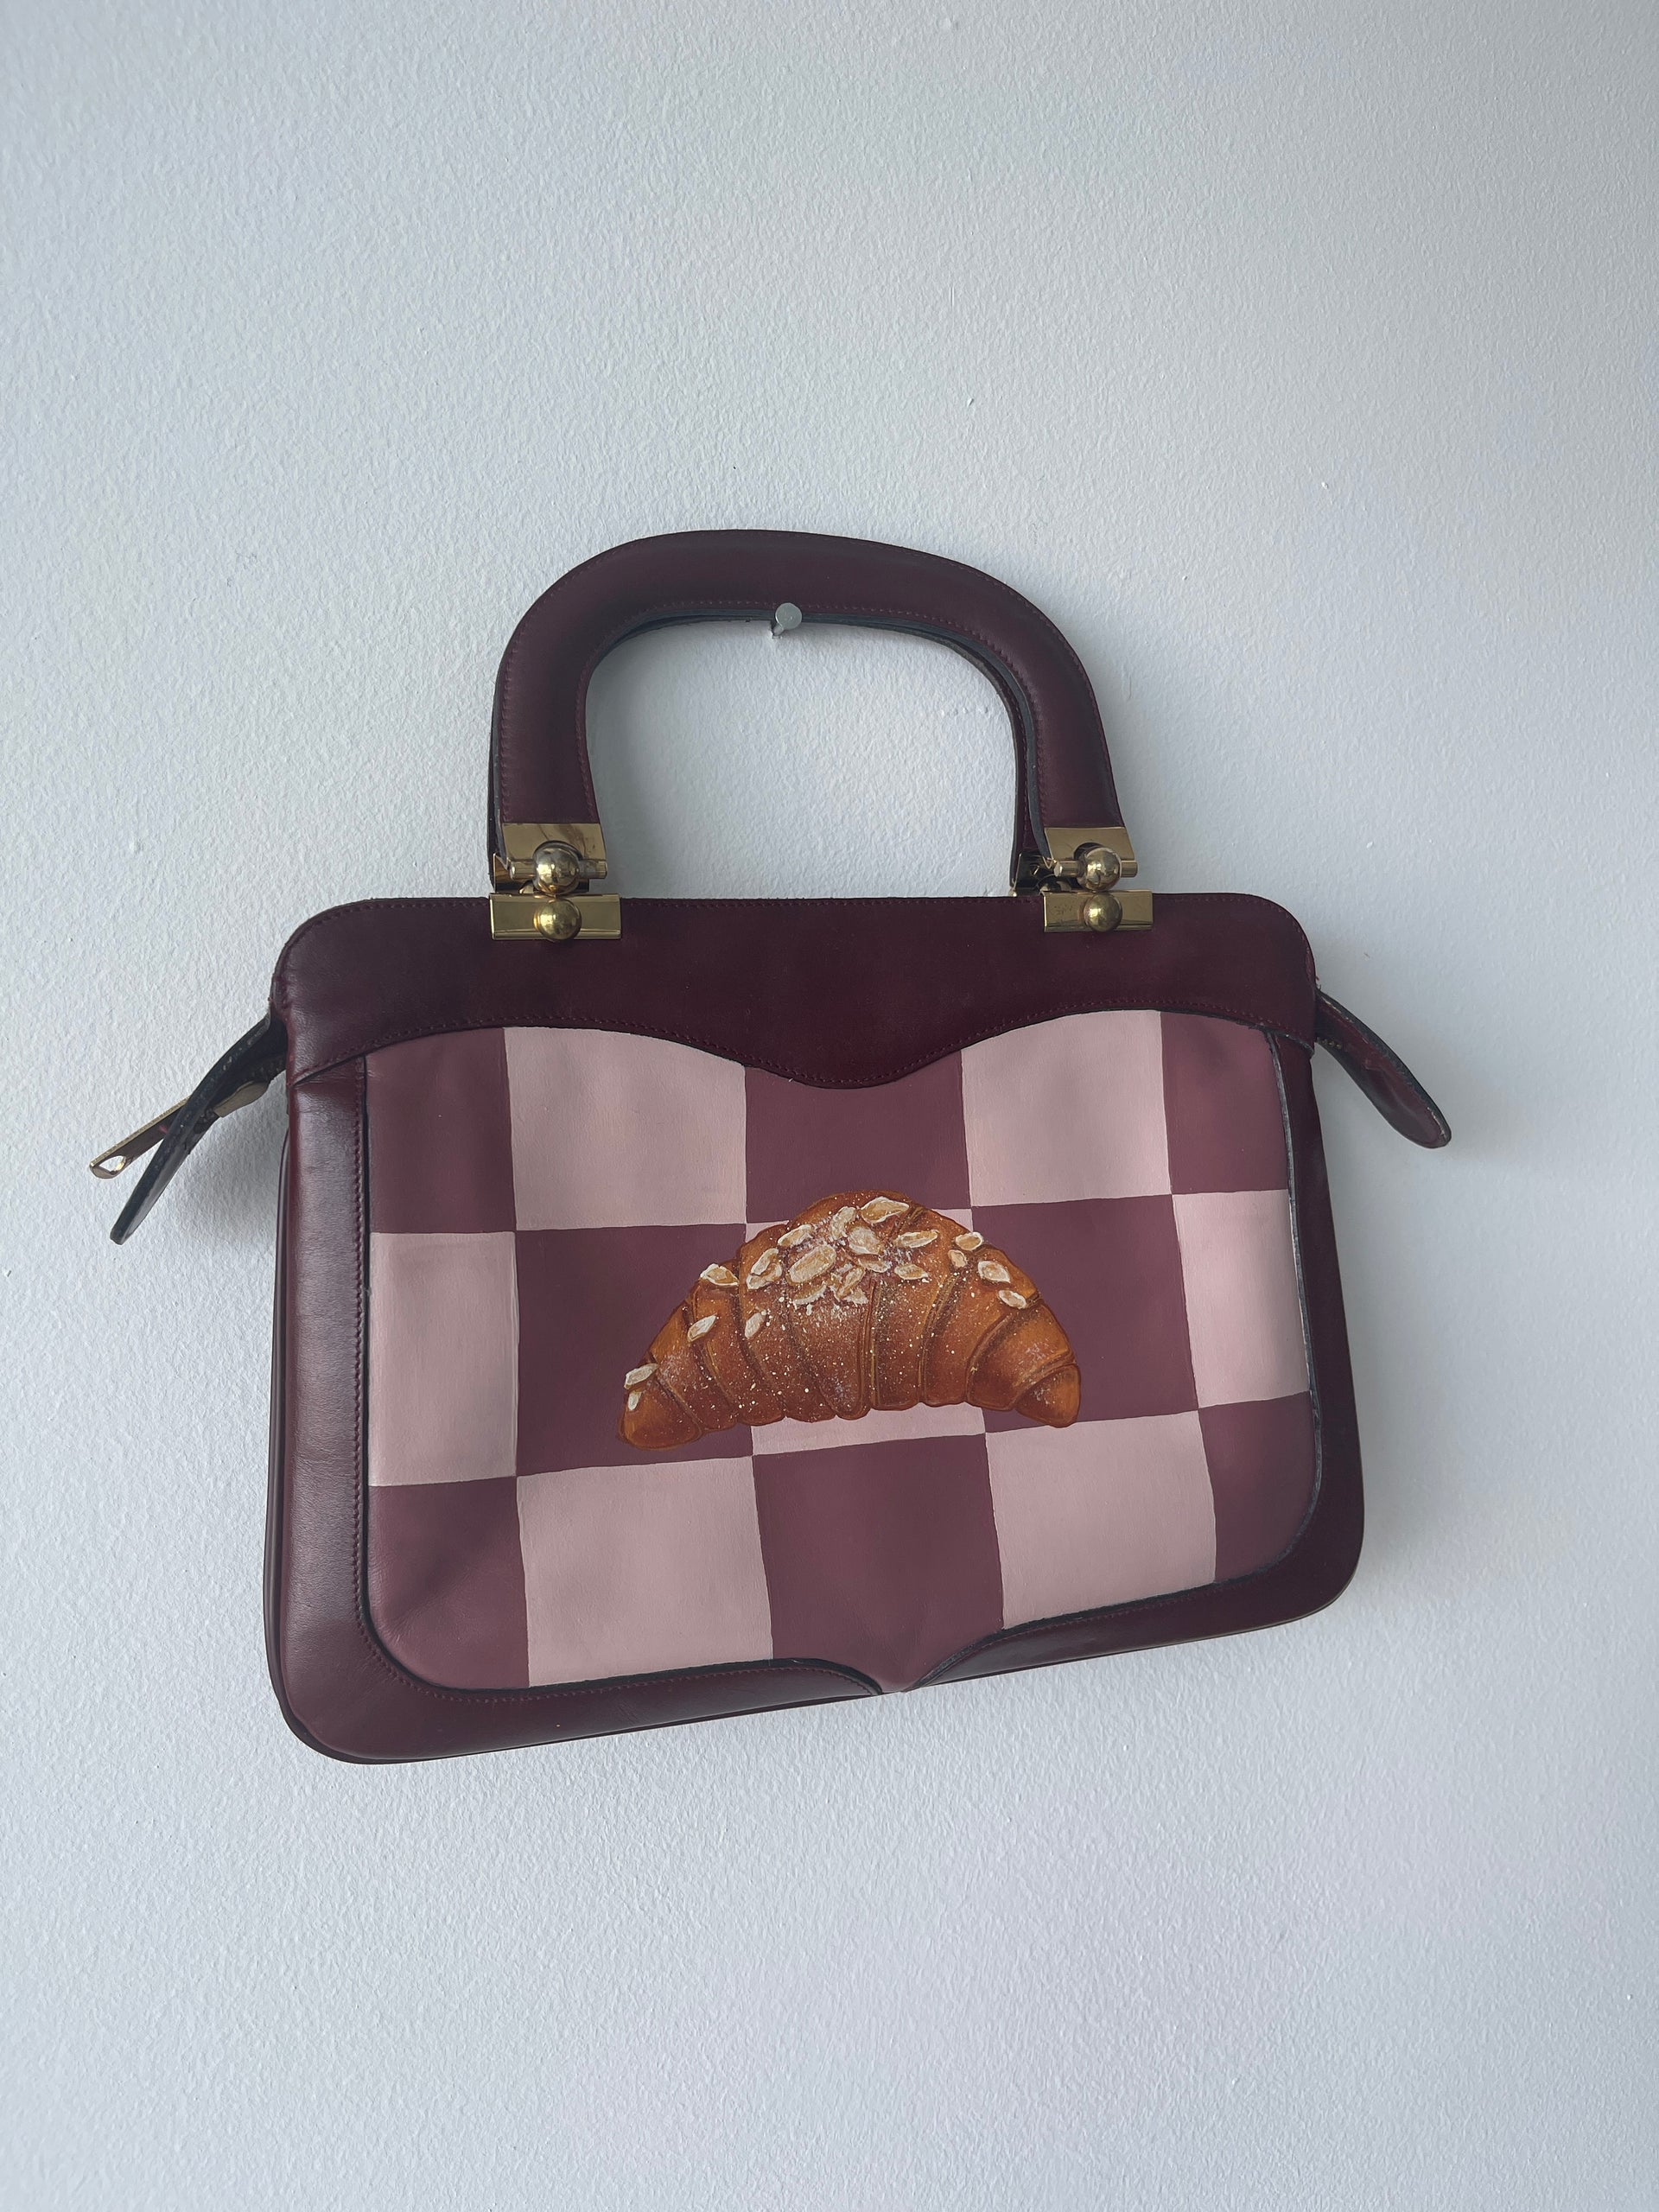 Check Please! Hand-painted Almond Croissant Bag